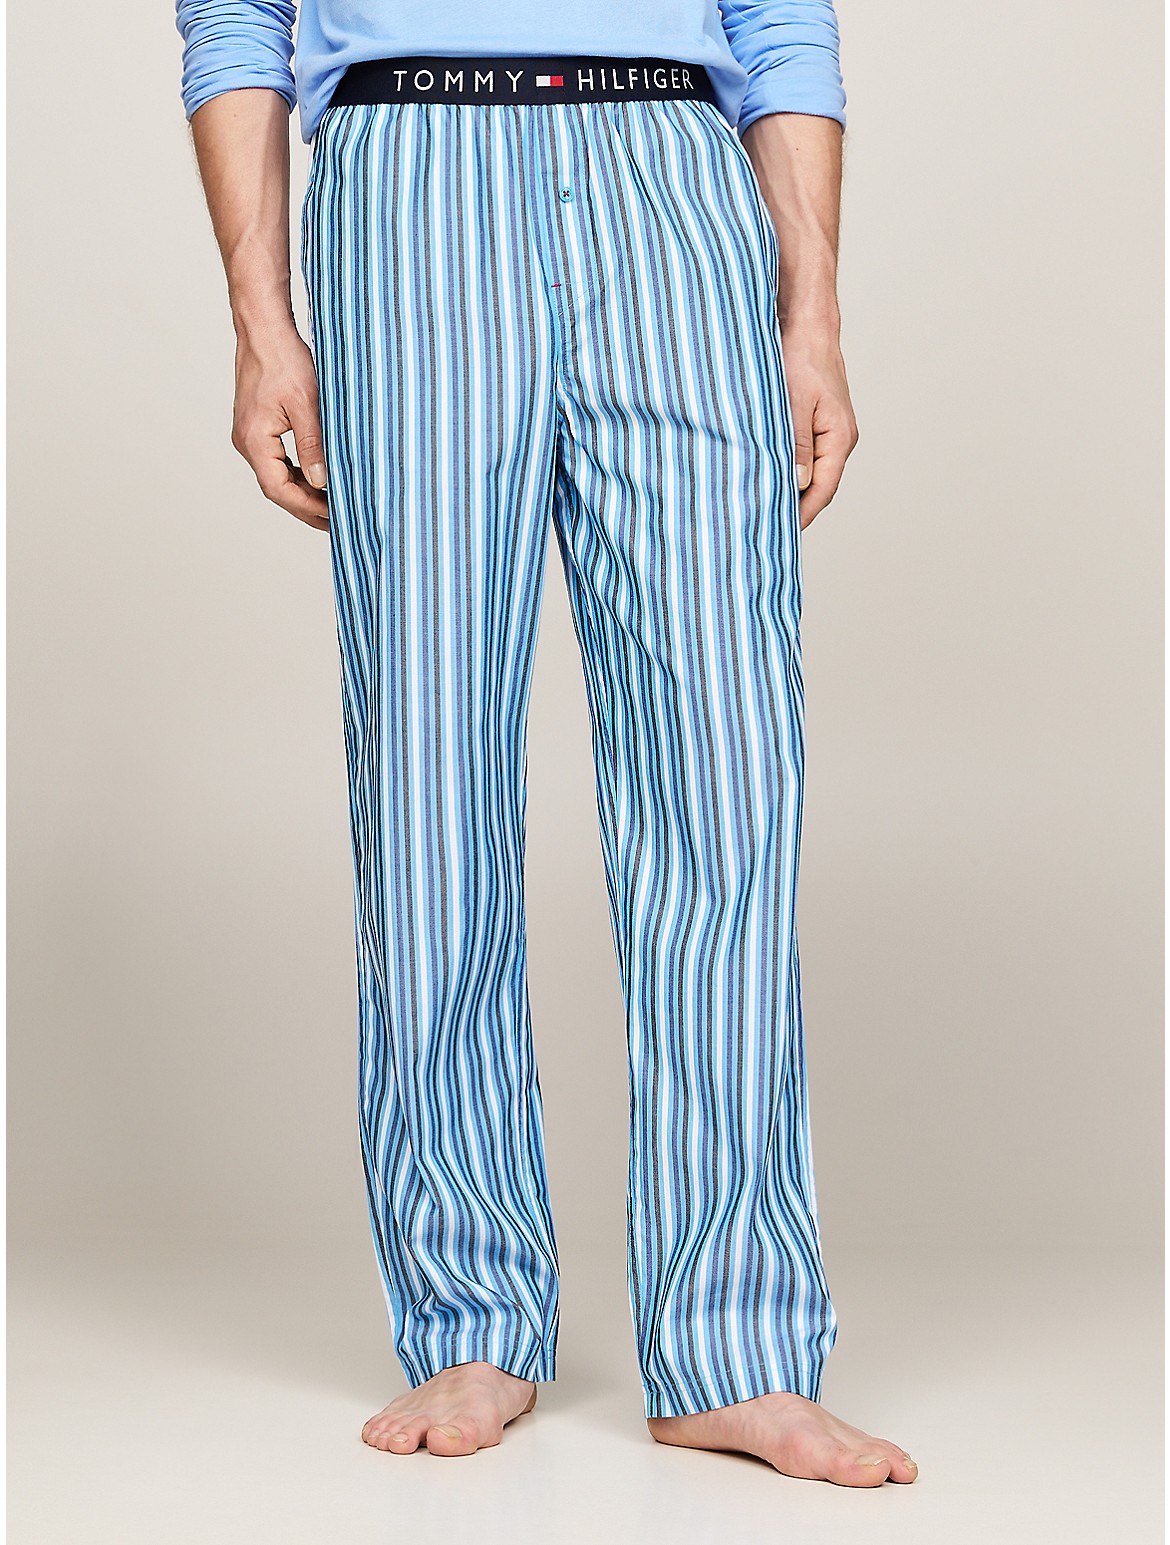 Tommy Hilfiger Logo Band Print Sleep Pant In Ithaca/glam Blue